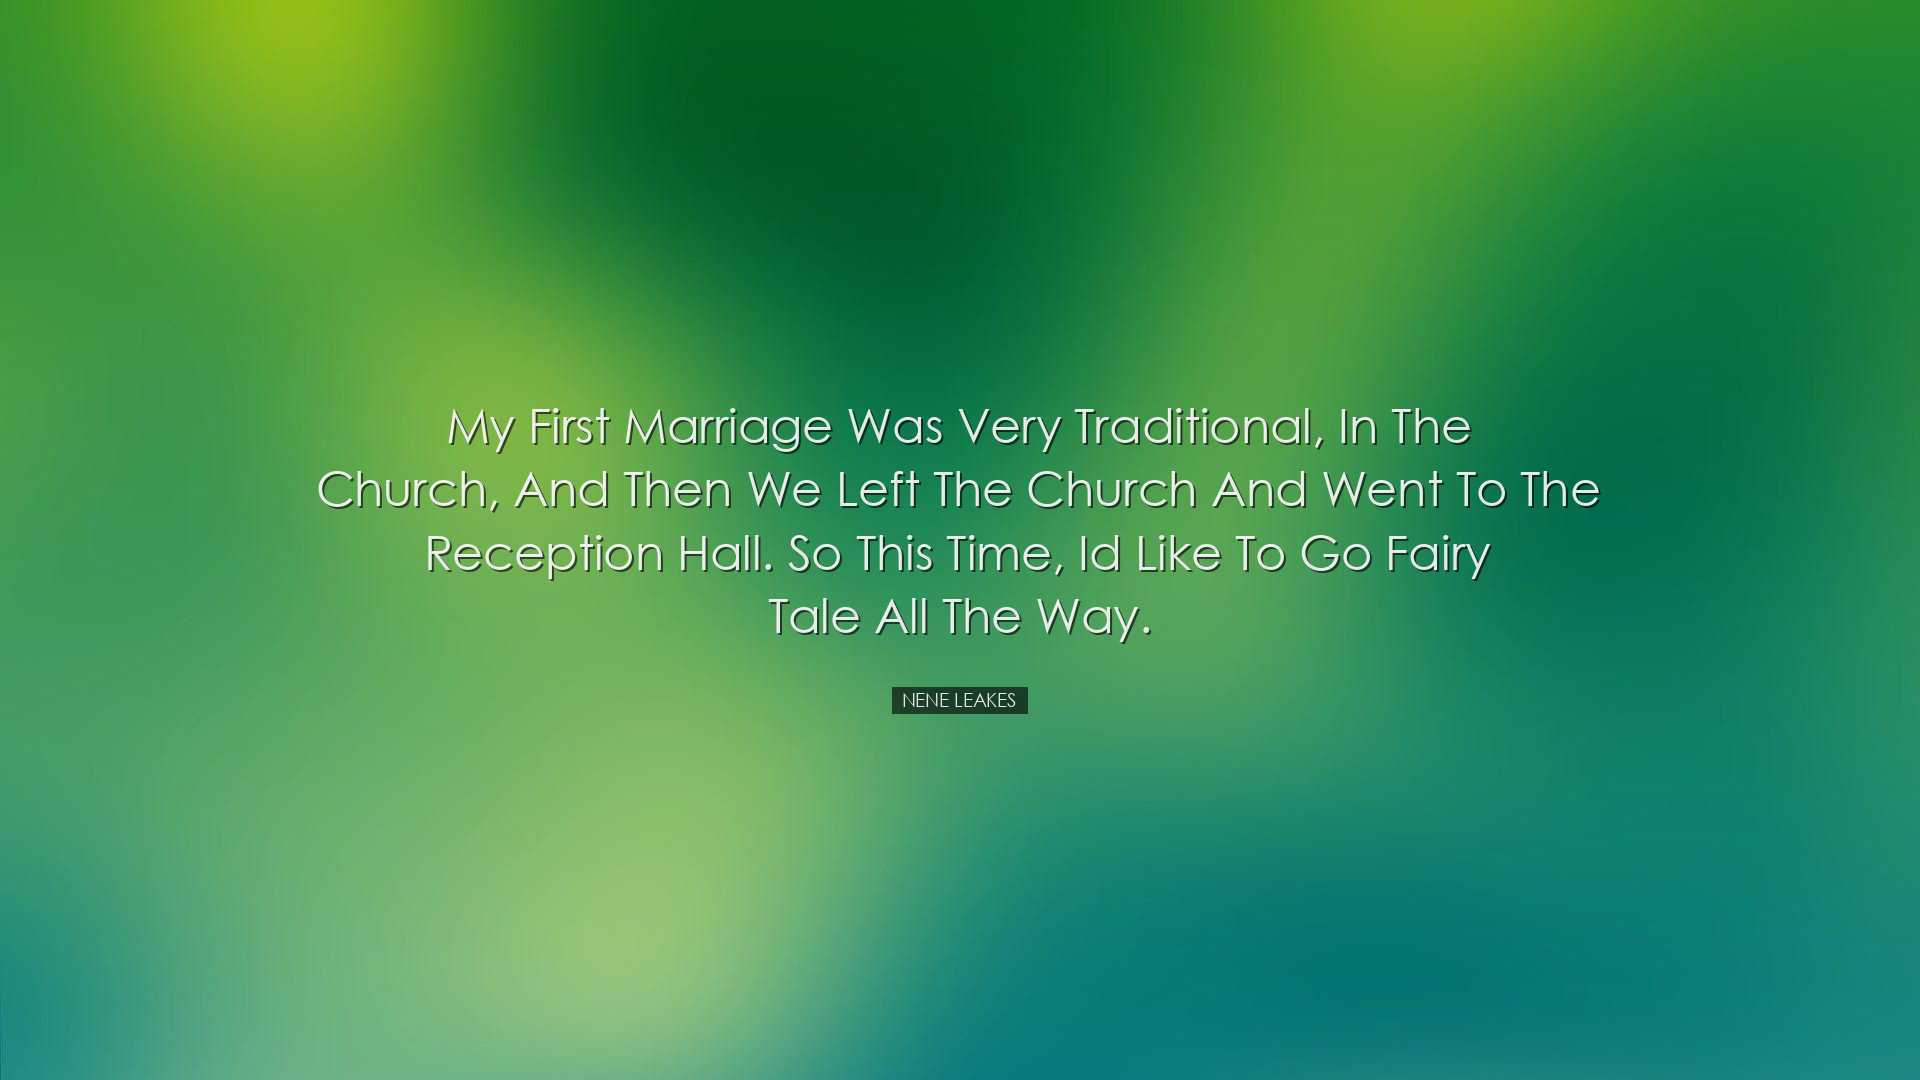 My first marriage was very traditional, in the church, and then we